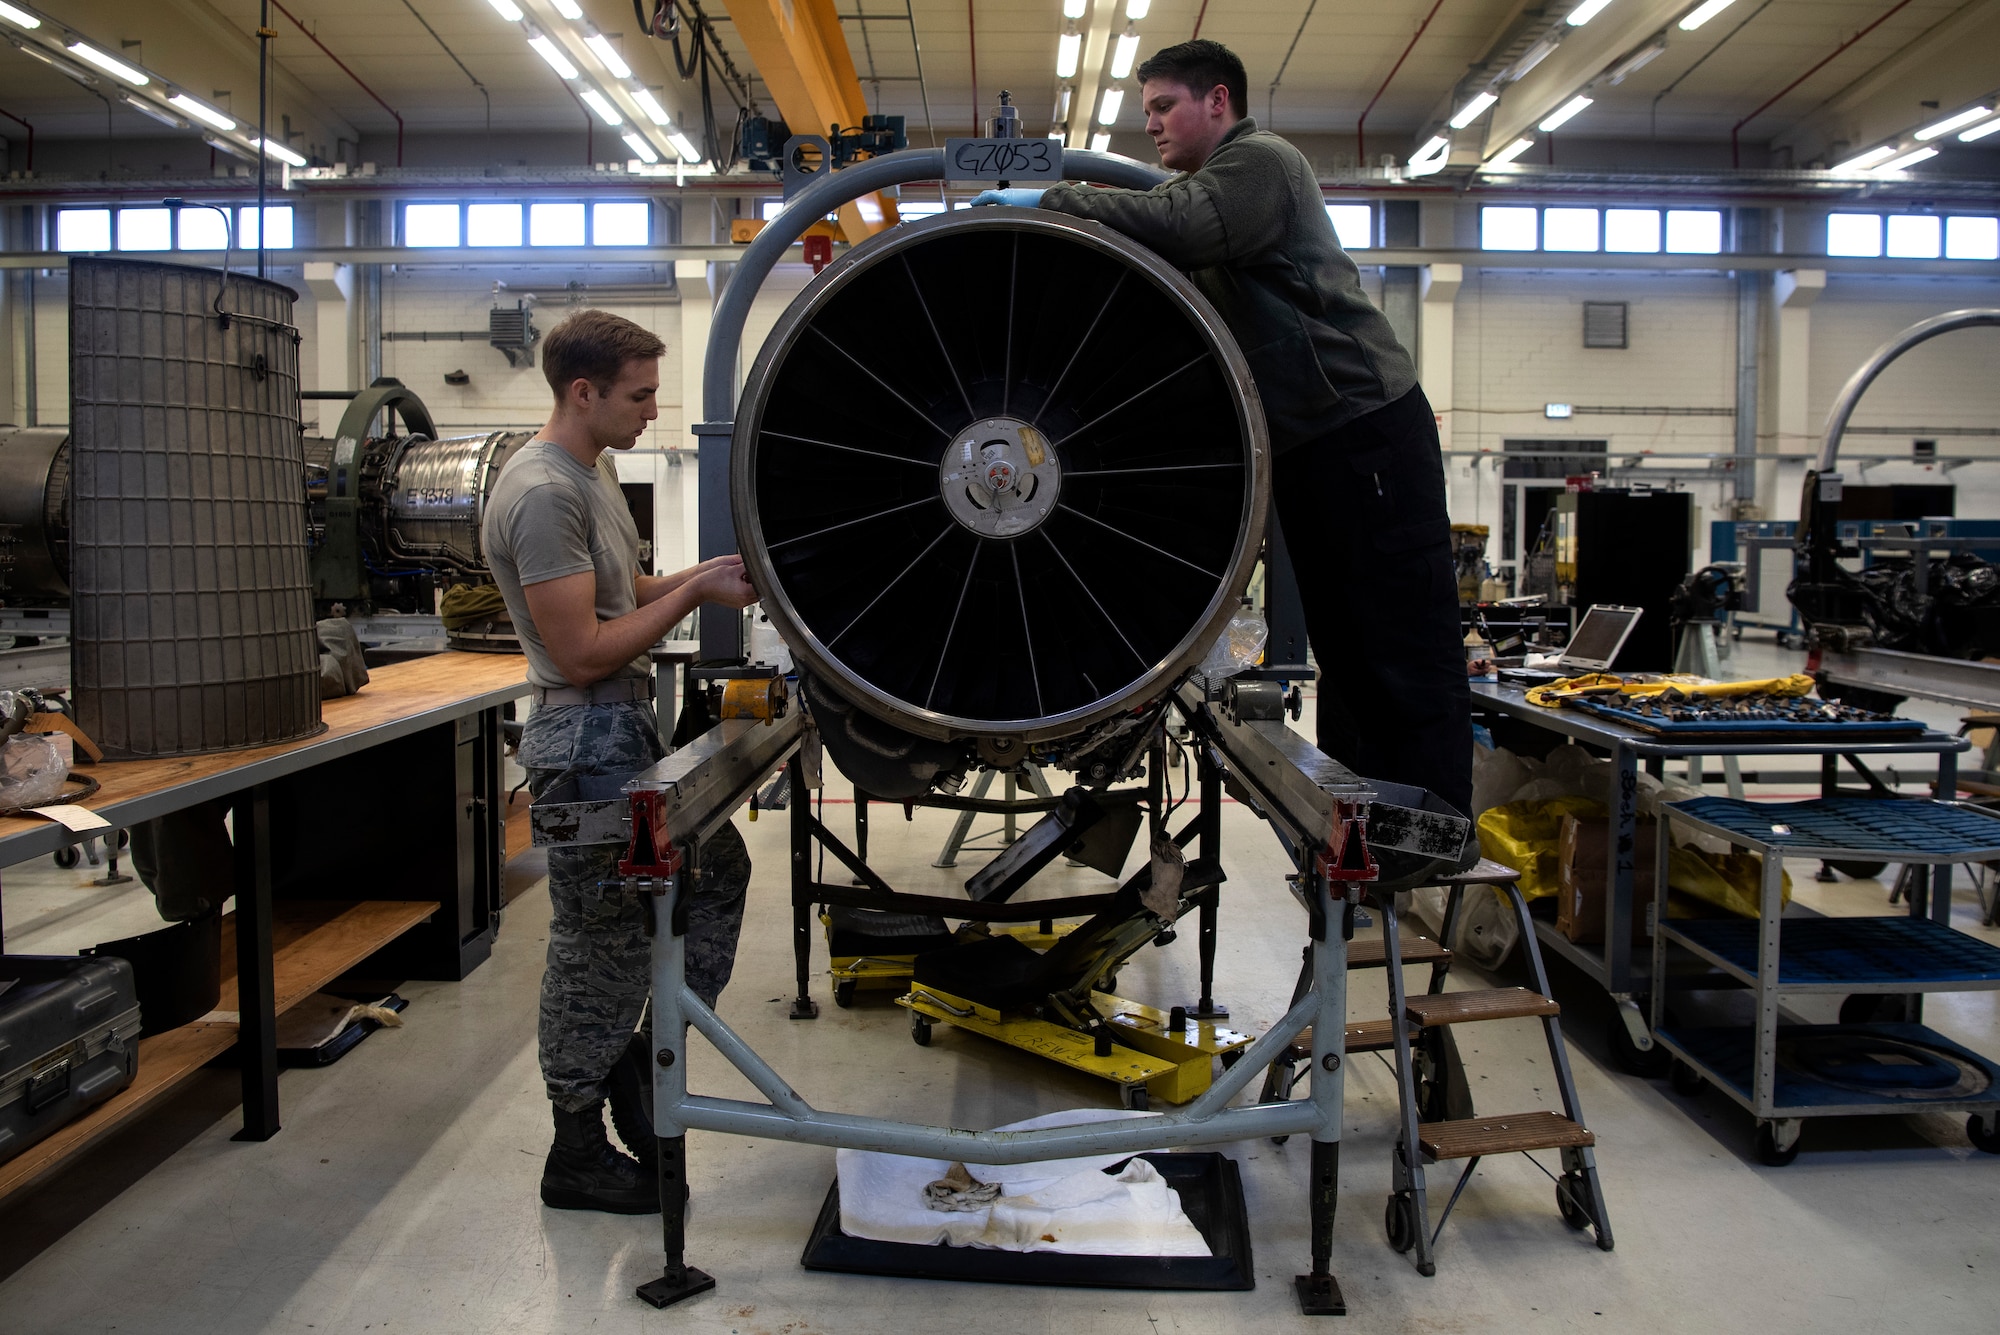 U.S. Air Force Staff Sgt. John Barickman, 52nd Maintenance Squadron aerospace propulsion craftsman, left, and Airman 1st Class Austin Wise, 52nd MXS aerospace propulsion journeyman, install an F110-GE-129 jet engine upper-fan stator case at Spangdahlem Air Base, Germany, Feb. 25, 2020. The 52nd MXS Propulsion Flight is U.S. Air Forces in Europe's sole centralized repair facility for F110 engines and is in charge of engine inspection, teardown, buildup, and testing. (U.S. Air Force photo by Airman 1st Class Valerie Seelye)